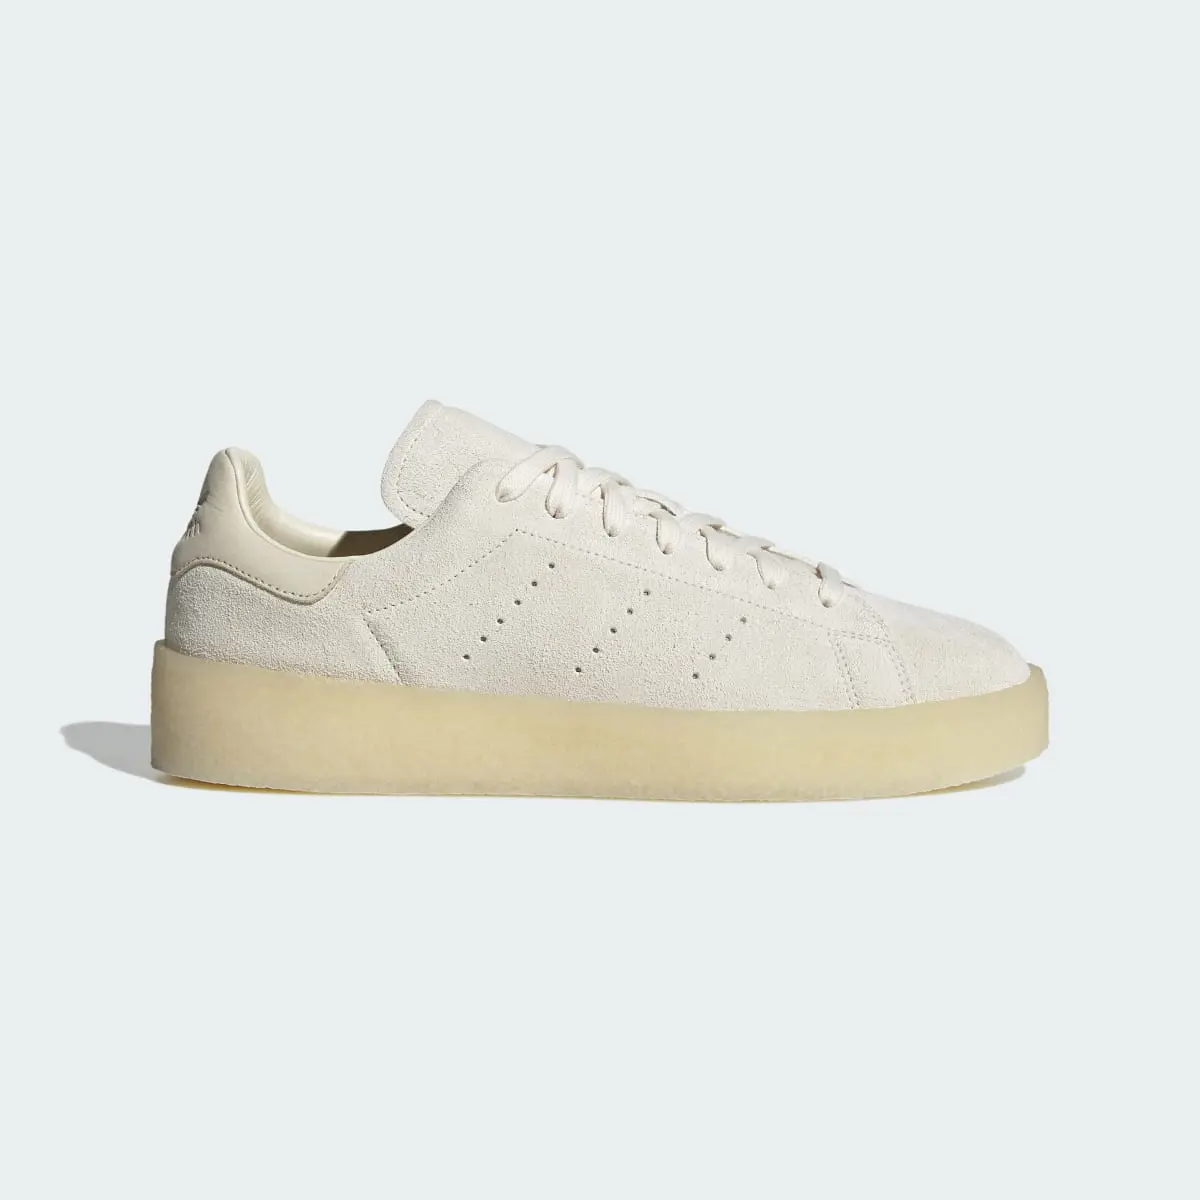 Adidas Stan Smith Crepe Shoes. 2